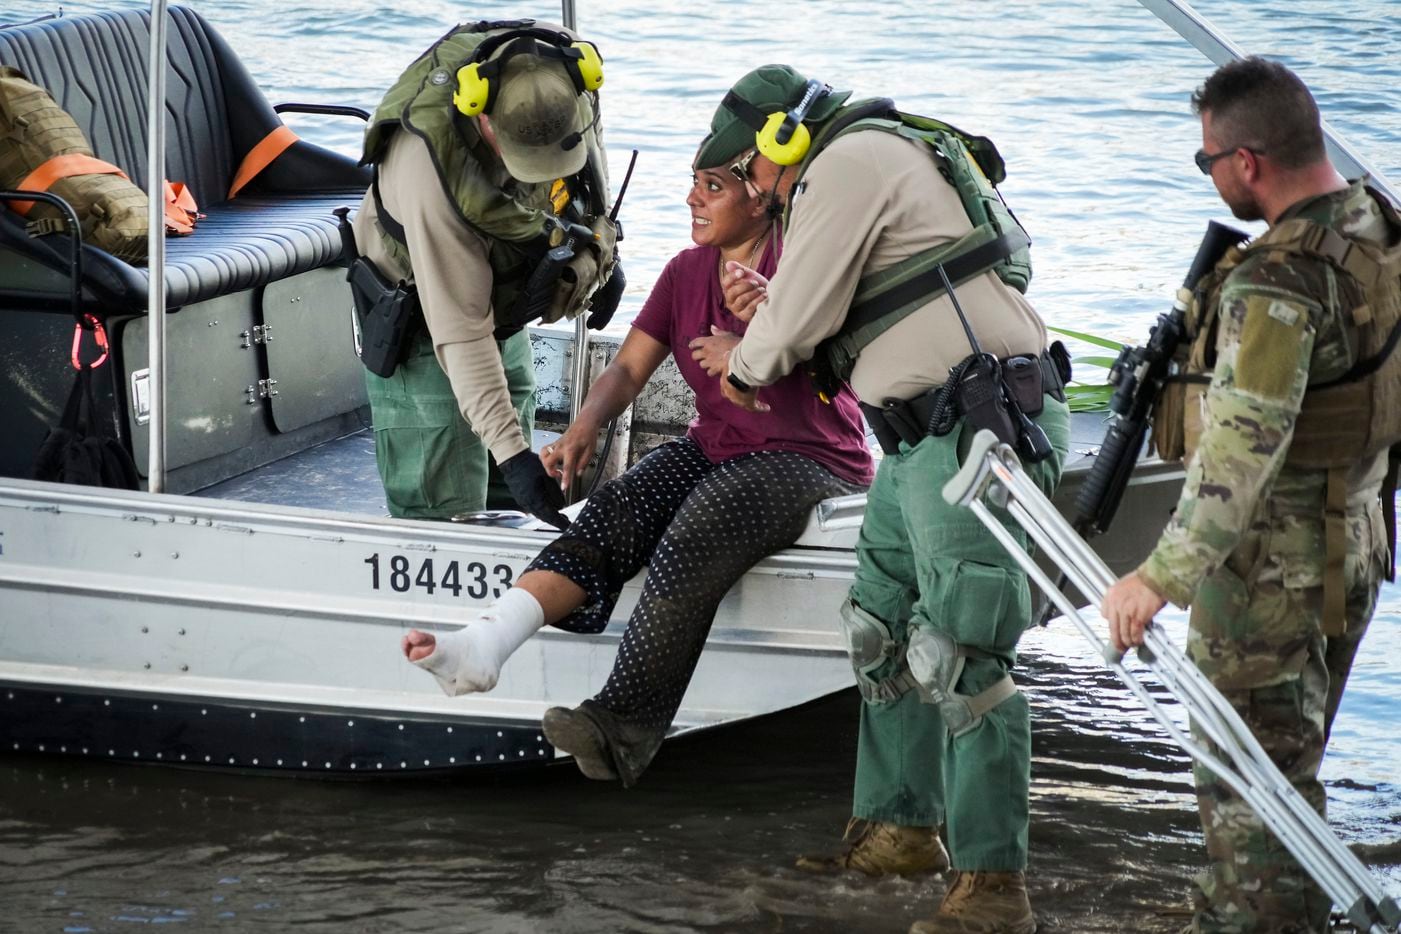 Maria, a Venezuelan migrant who was on crutches, is assisted from a boat by U. S. Border...